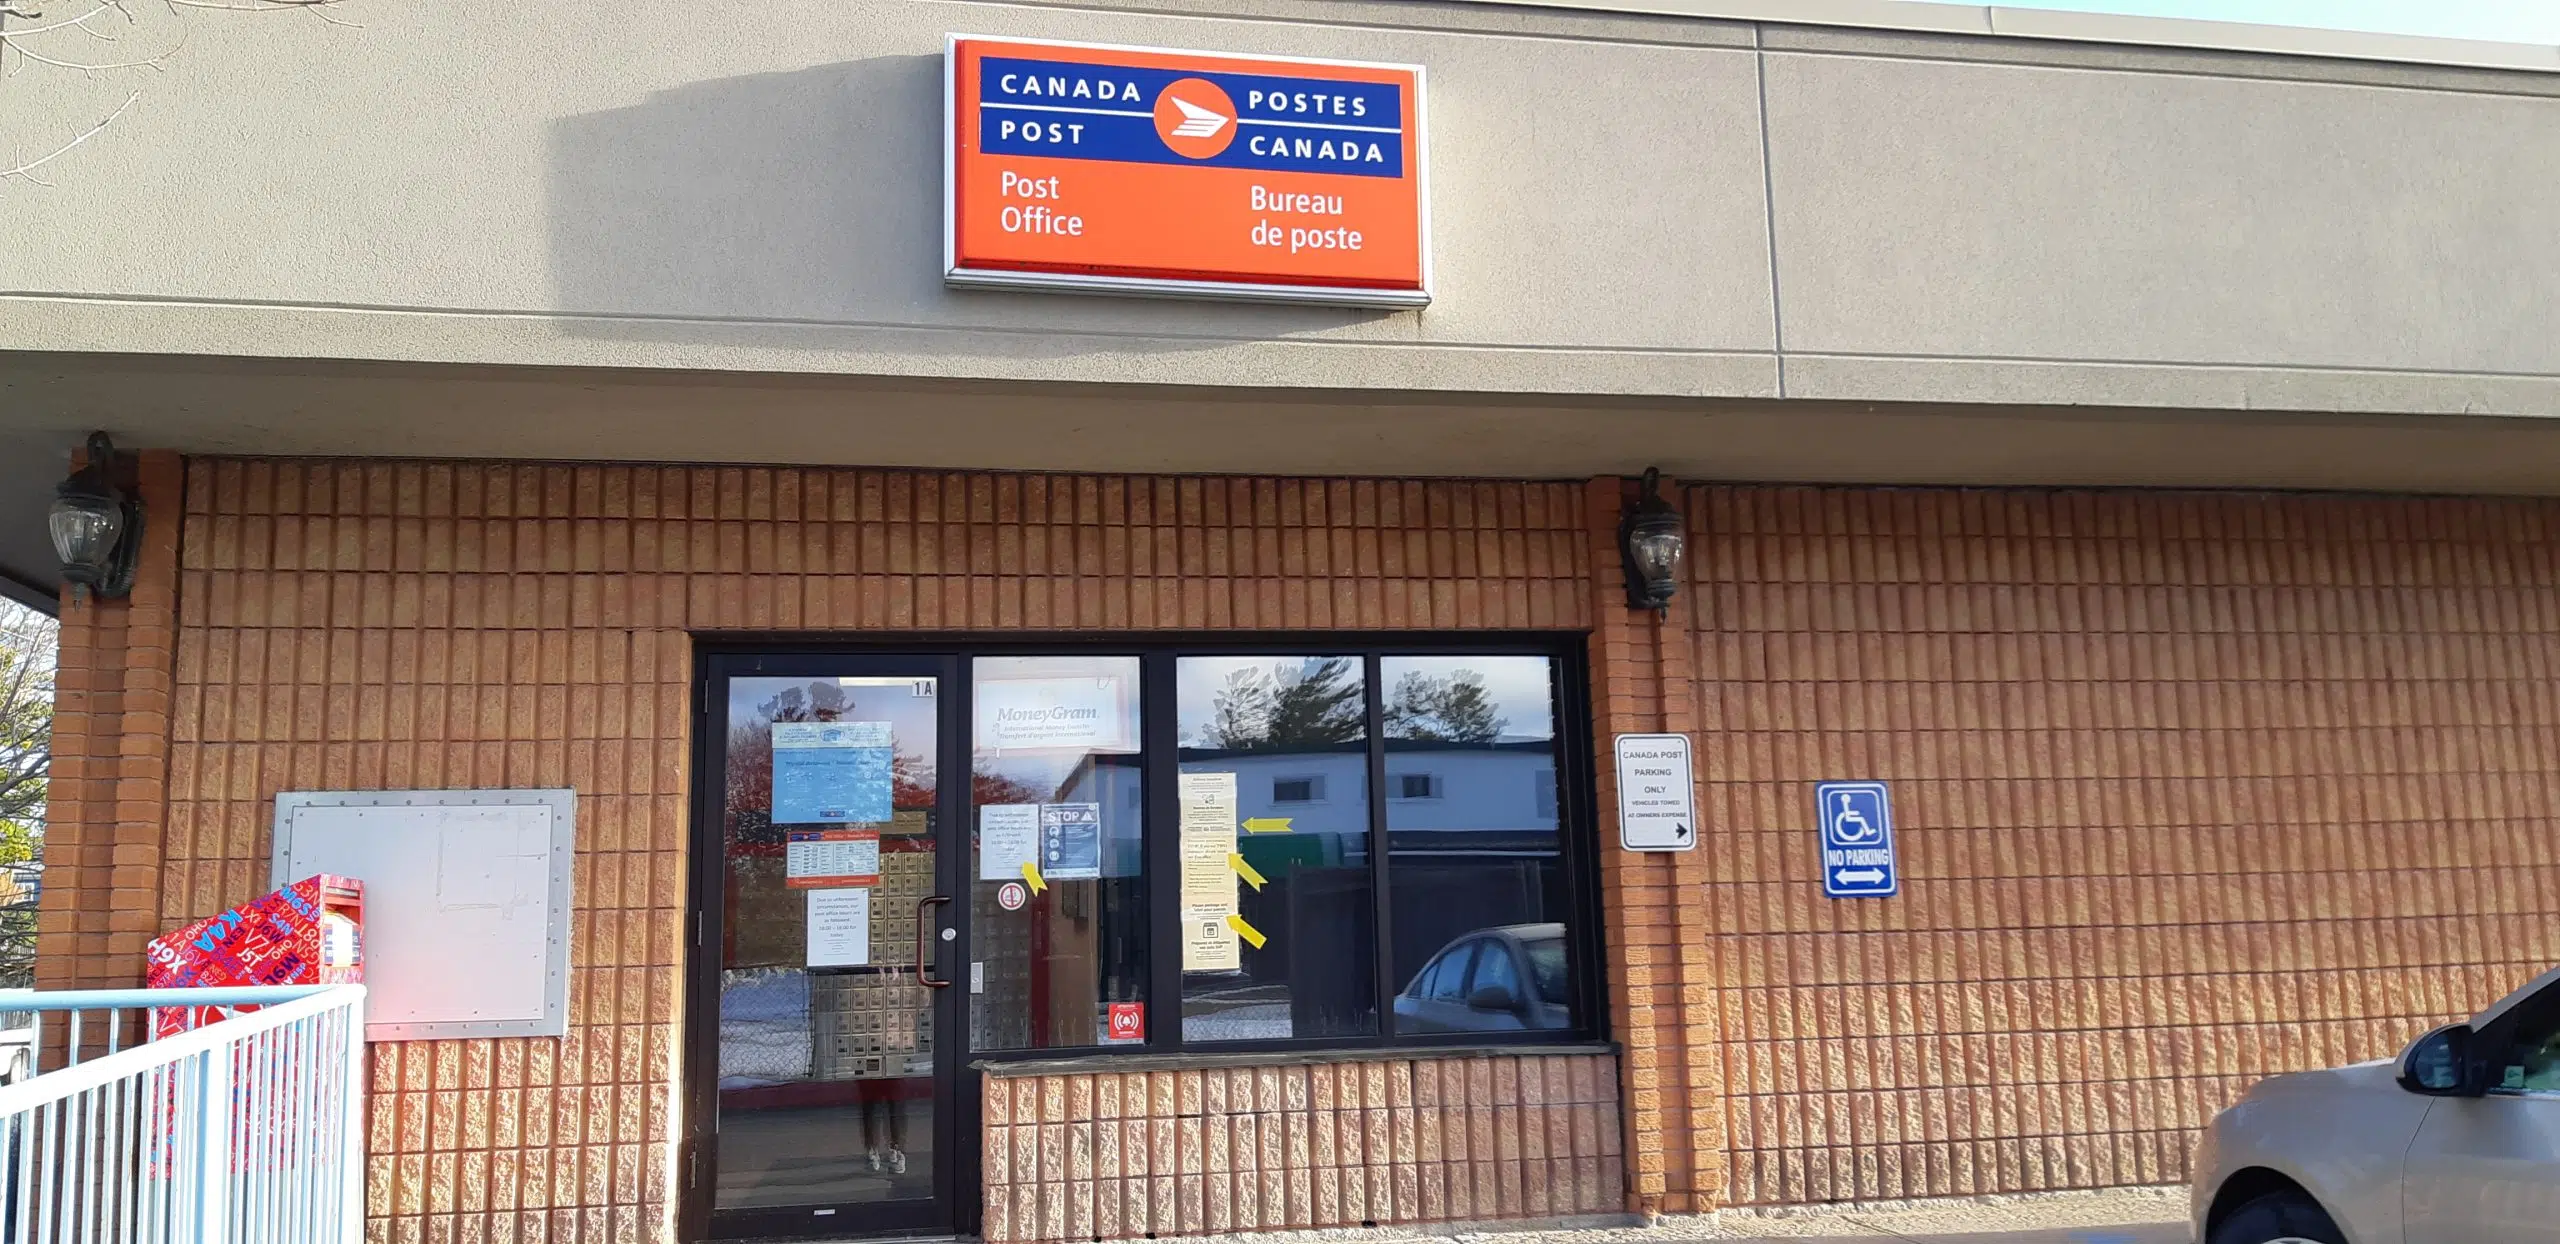 Confirmed Covid Case At Wasaga Beach Post Office | Bayshore Broadcasting  News Centre